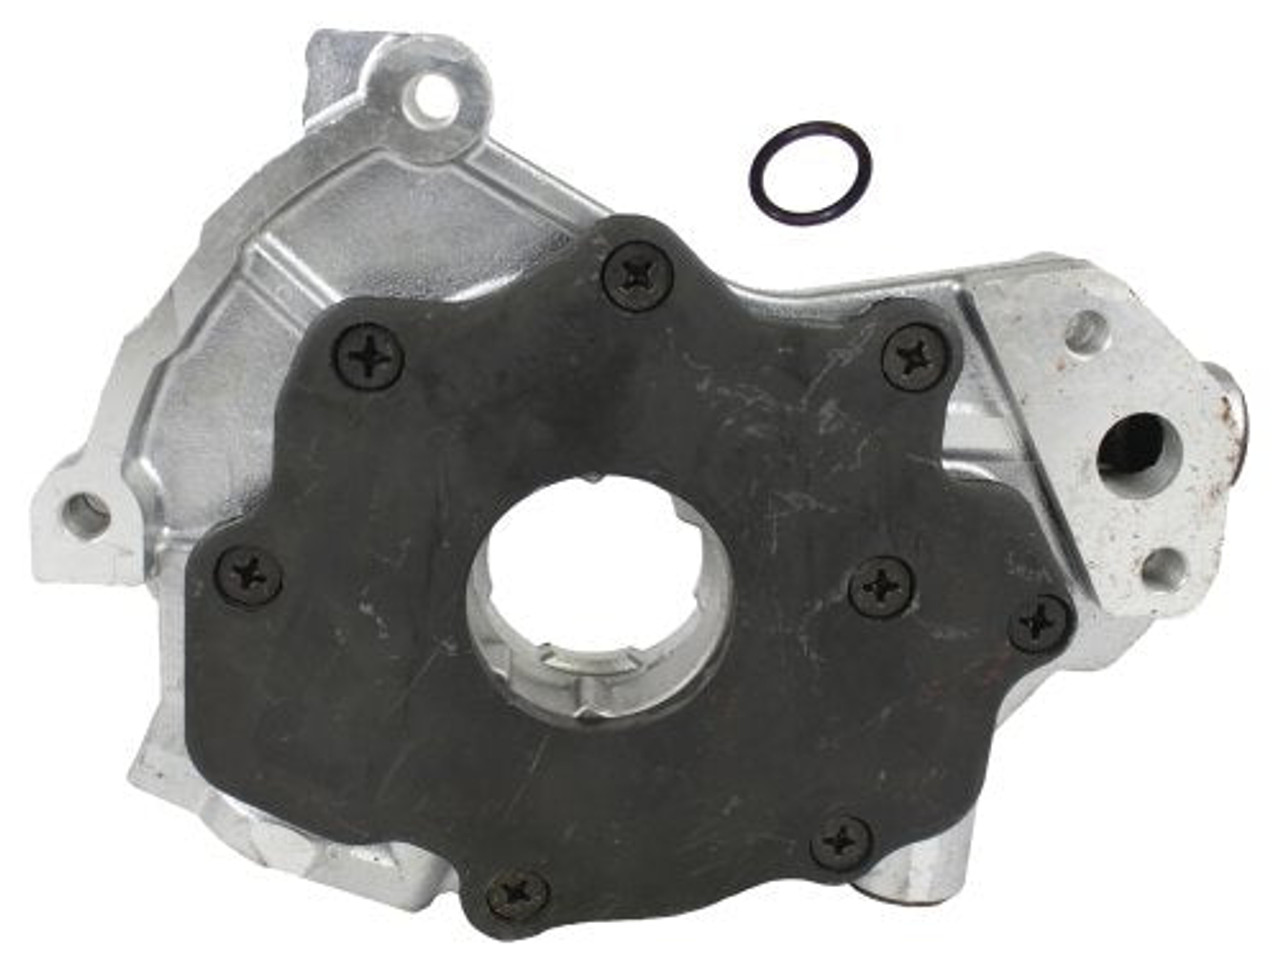 Oil Pump - 1996 Ford Mustang 4.6L Engine Parts # OP4143ZE36